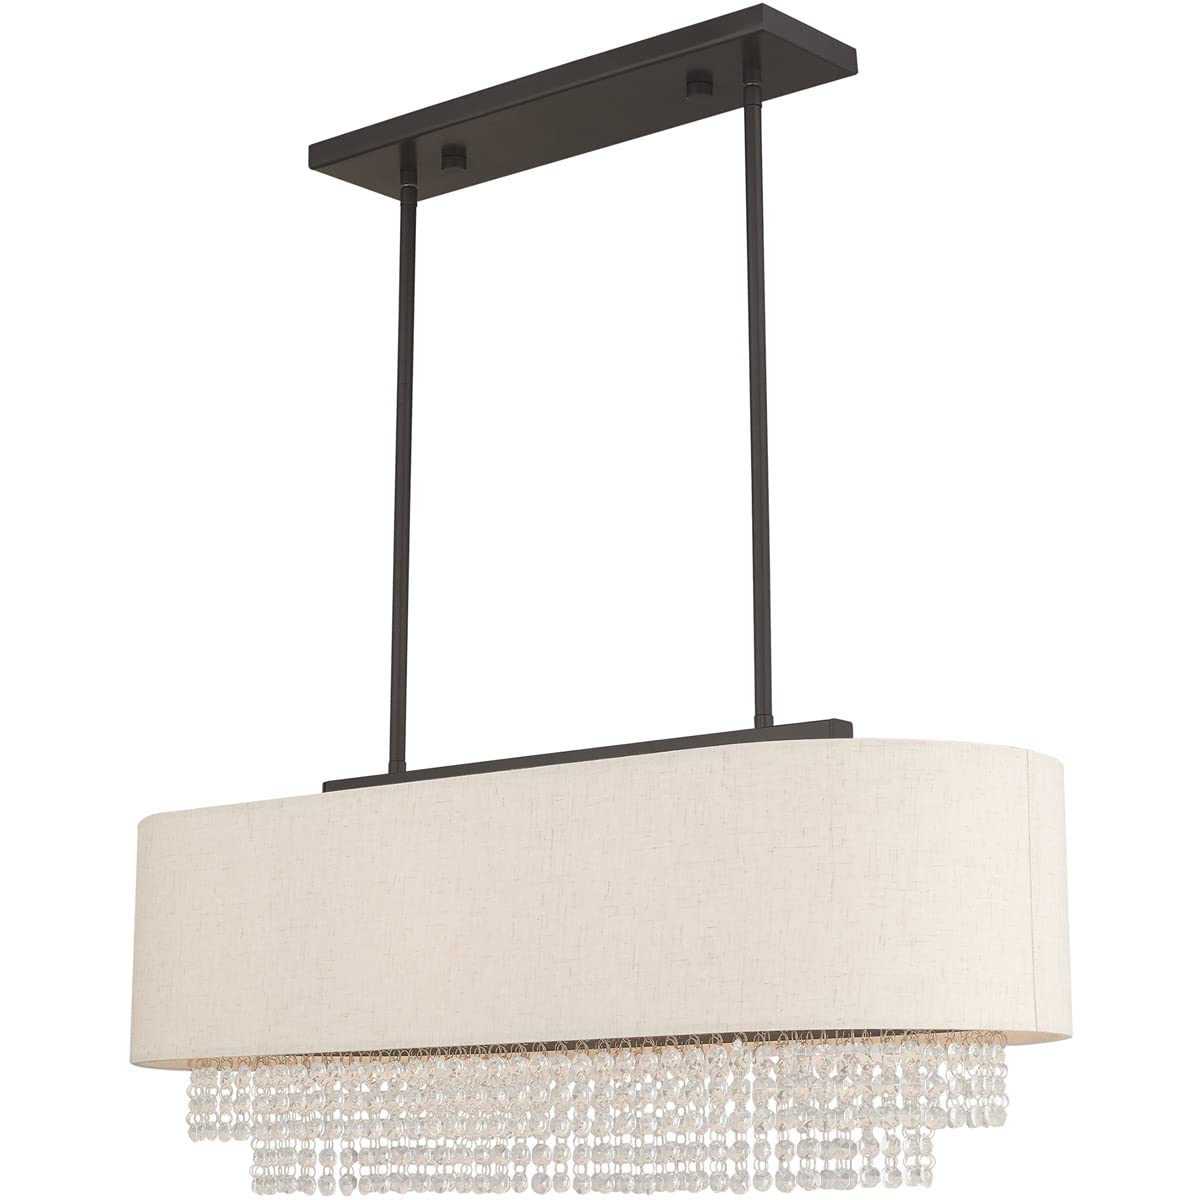 Livex Lighting 51123-92 Carlisle - 31" Three Light Linear Chandelier, English Bronze Finish with Oatmeal Fabric Shade with Clear Crystal